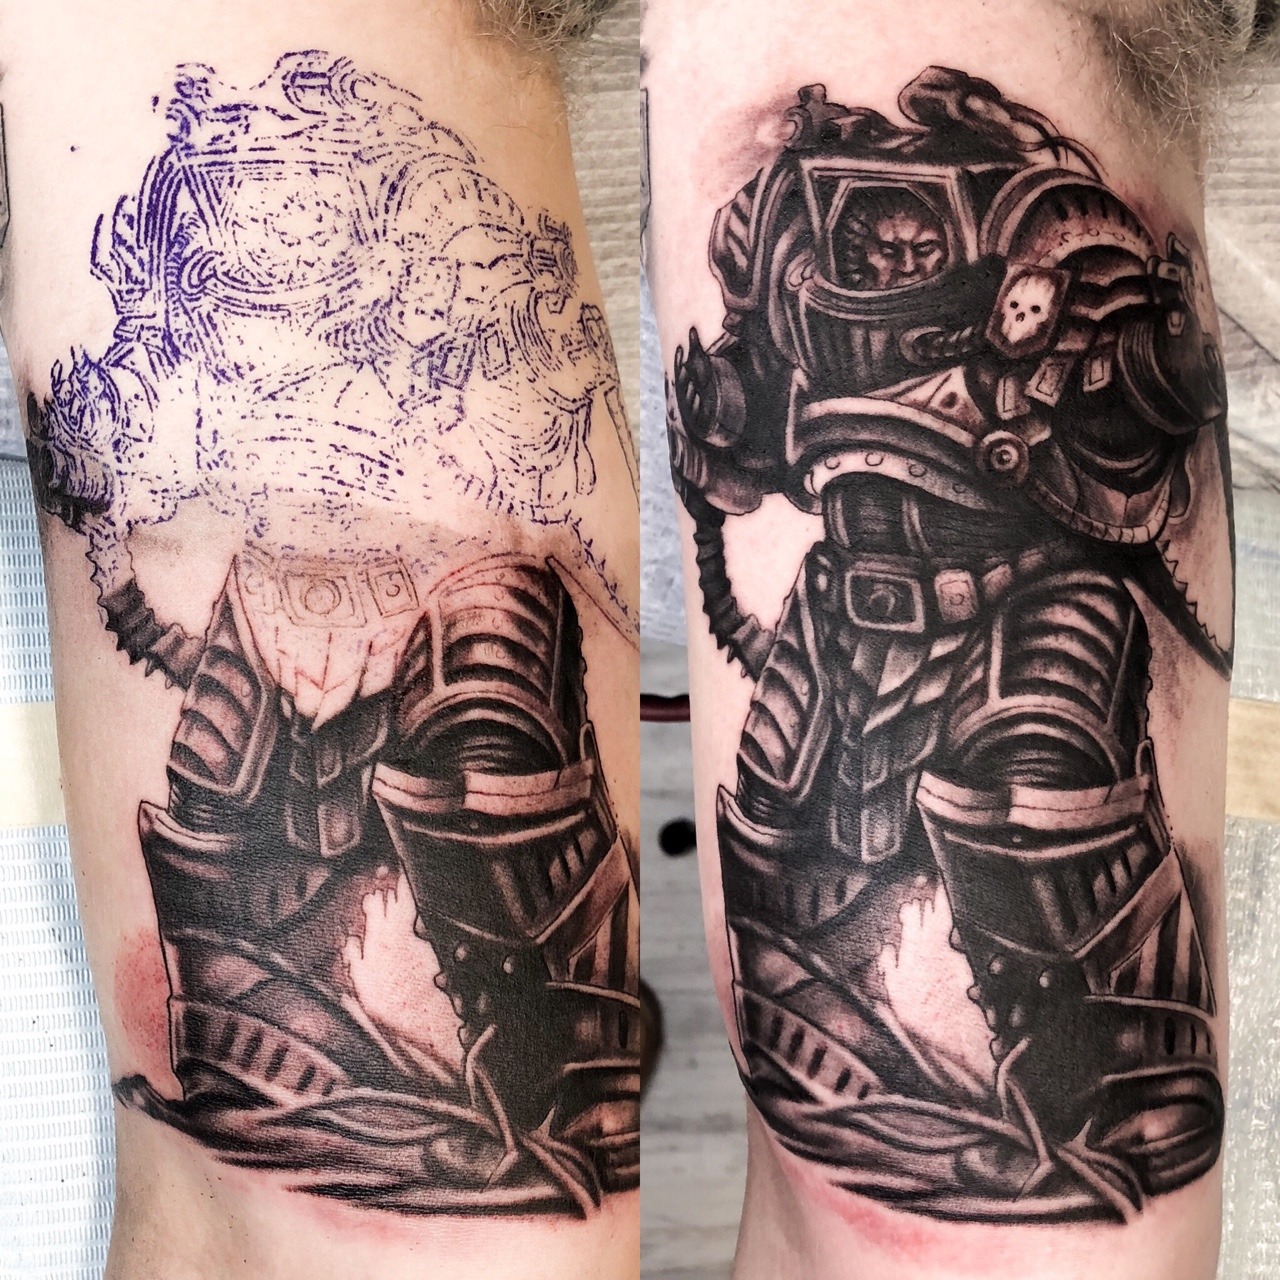 Seen a few 40k tattoos going about recently had mine progressed today  Blood has been spilt  rWarhammer40k